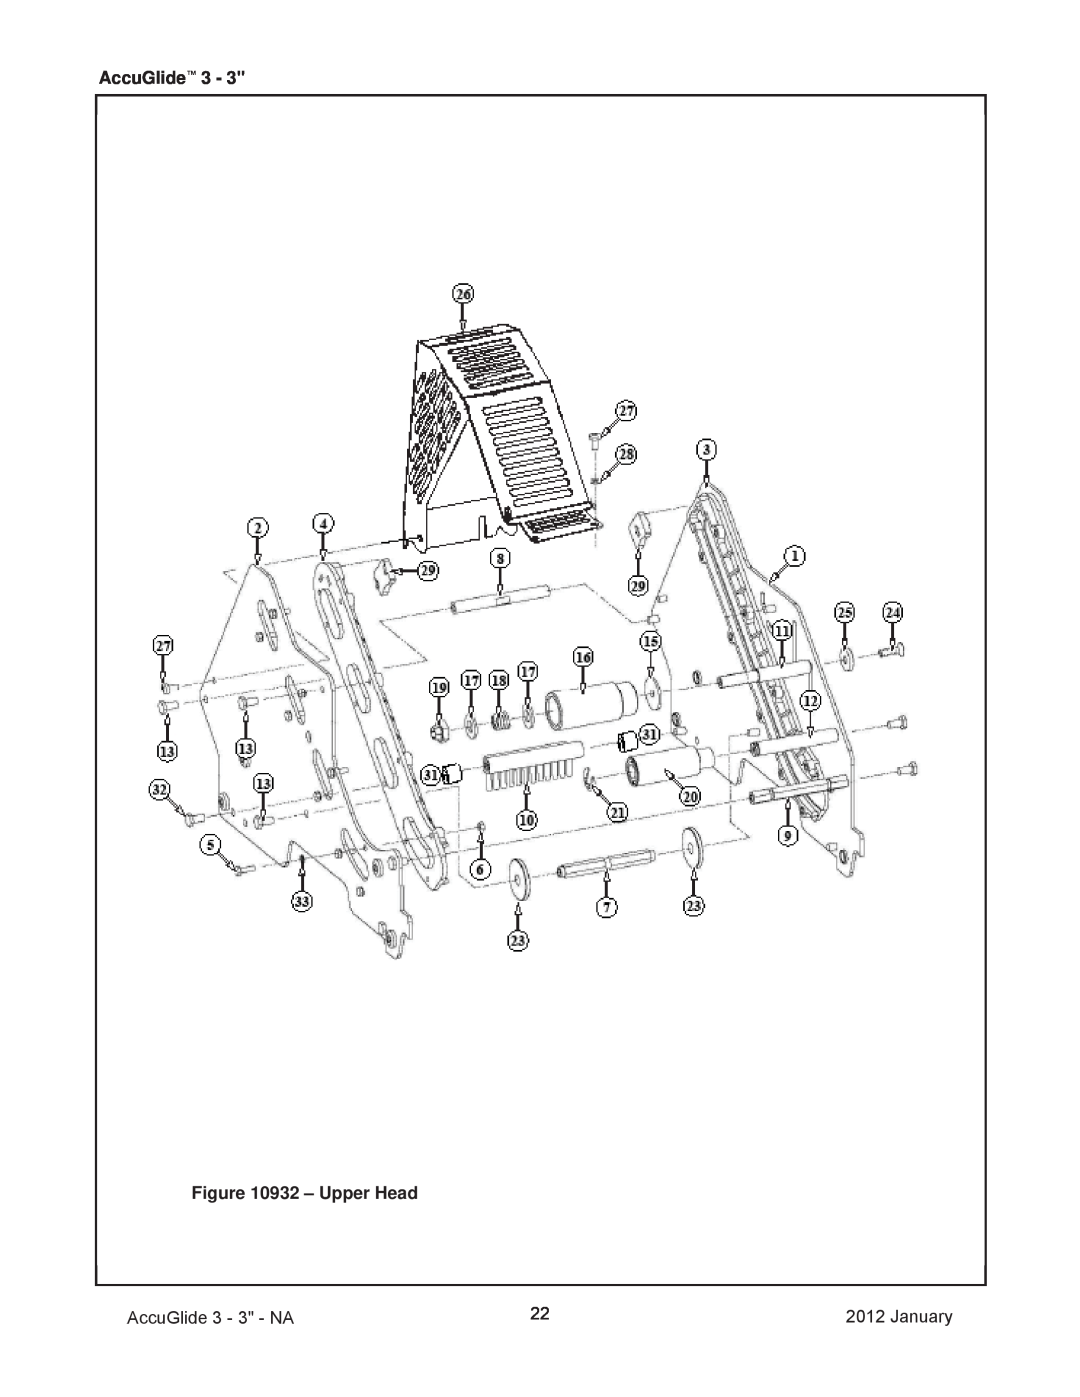 3M 40800 operating instructions Upper Head, AccuGlide 3 - 3 - NA, January 